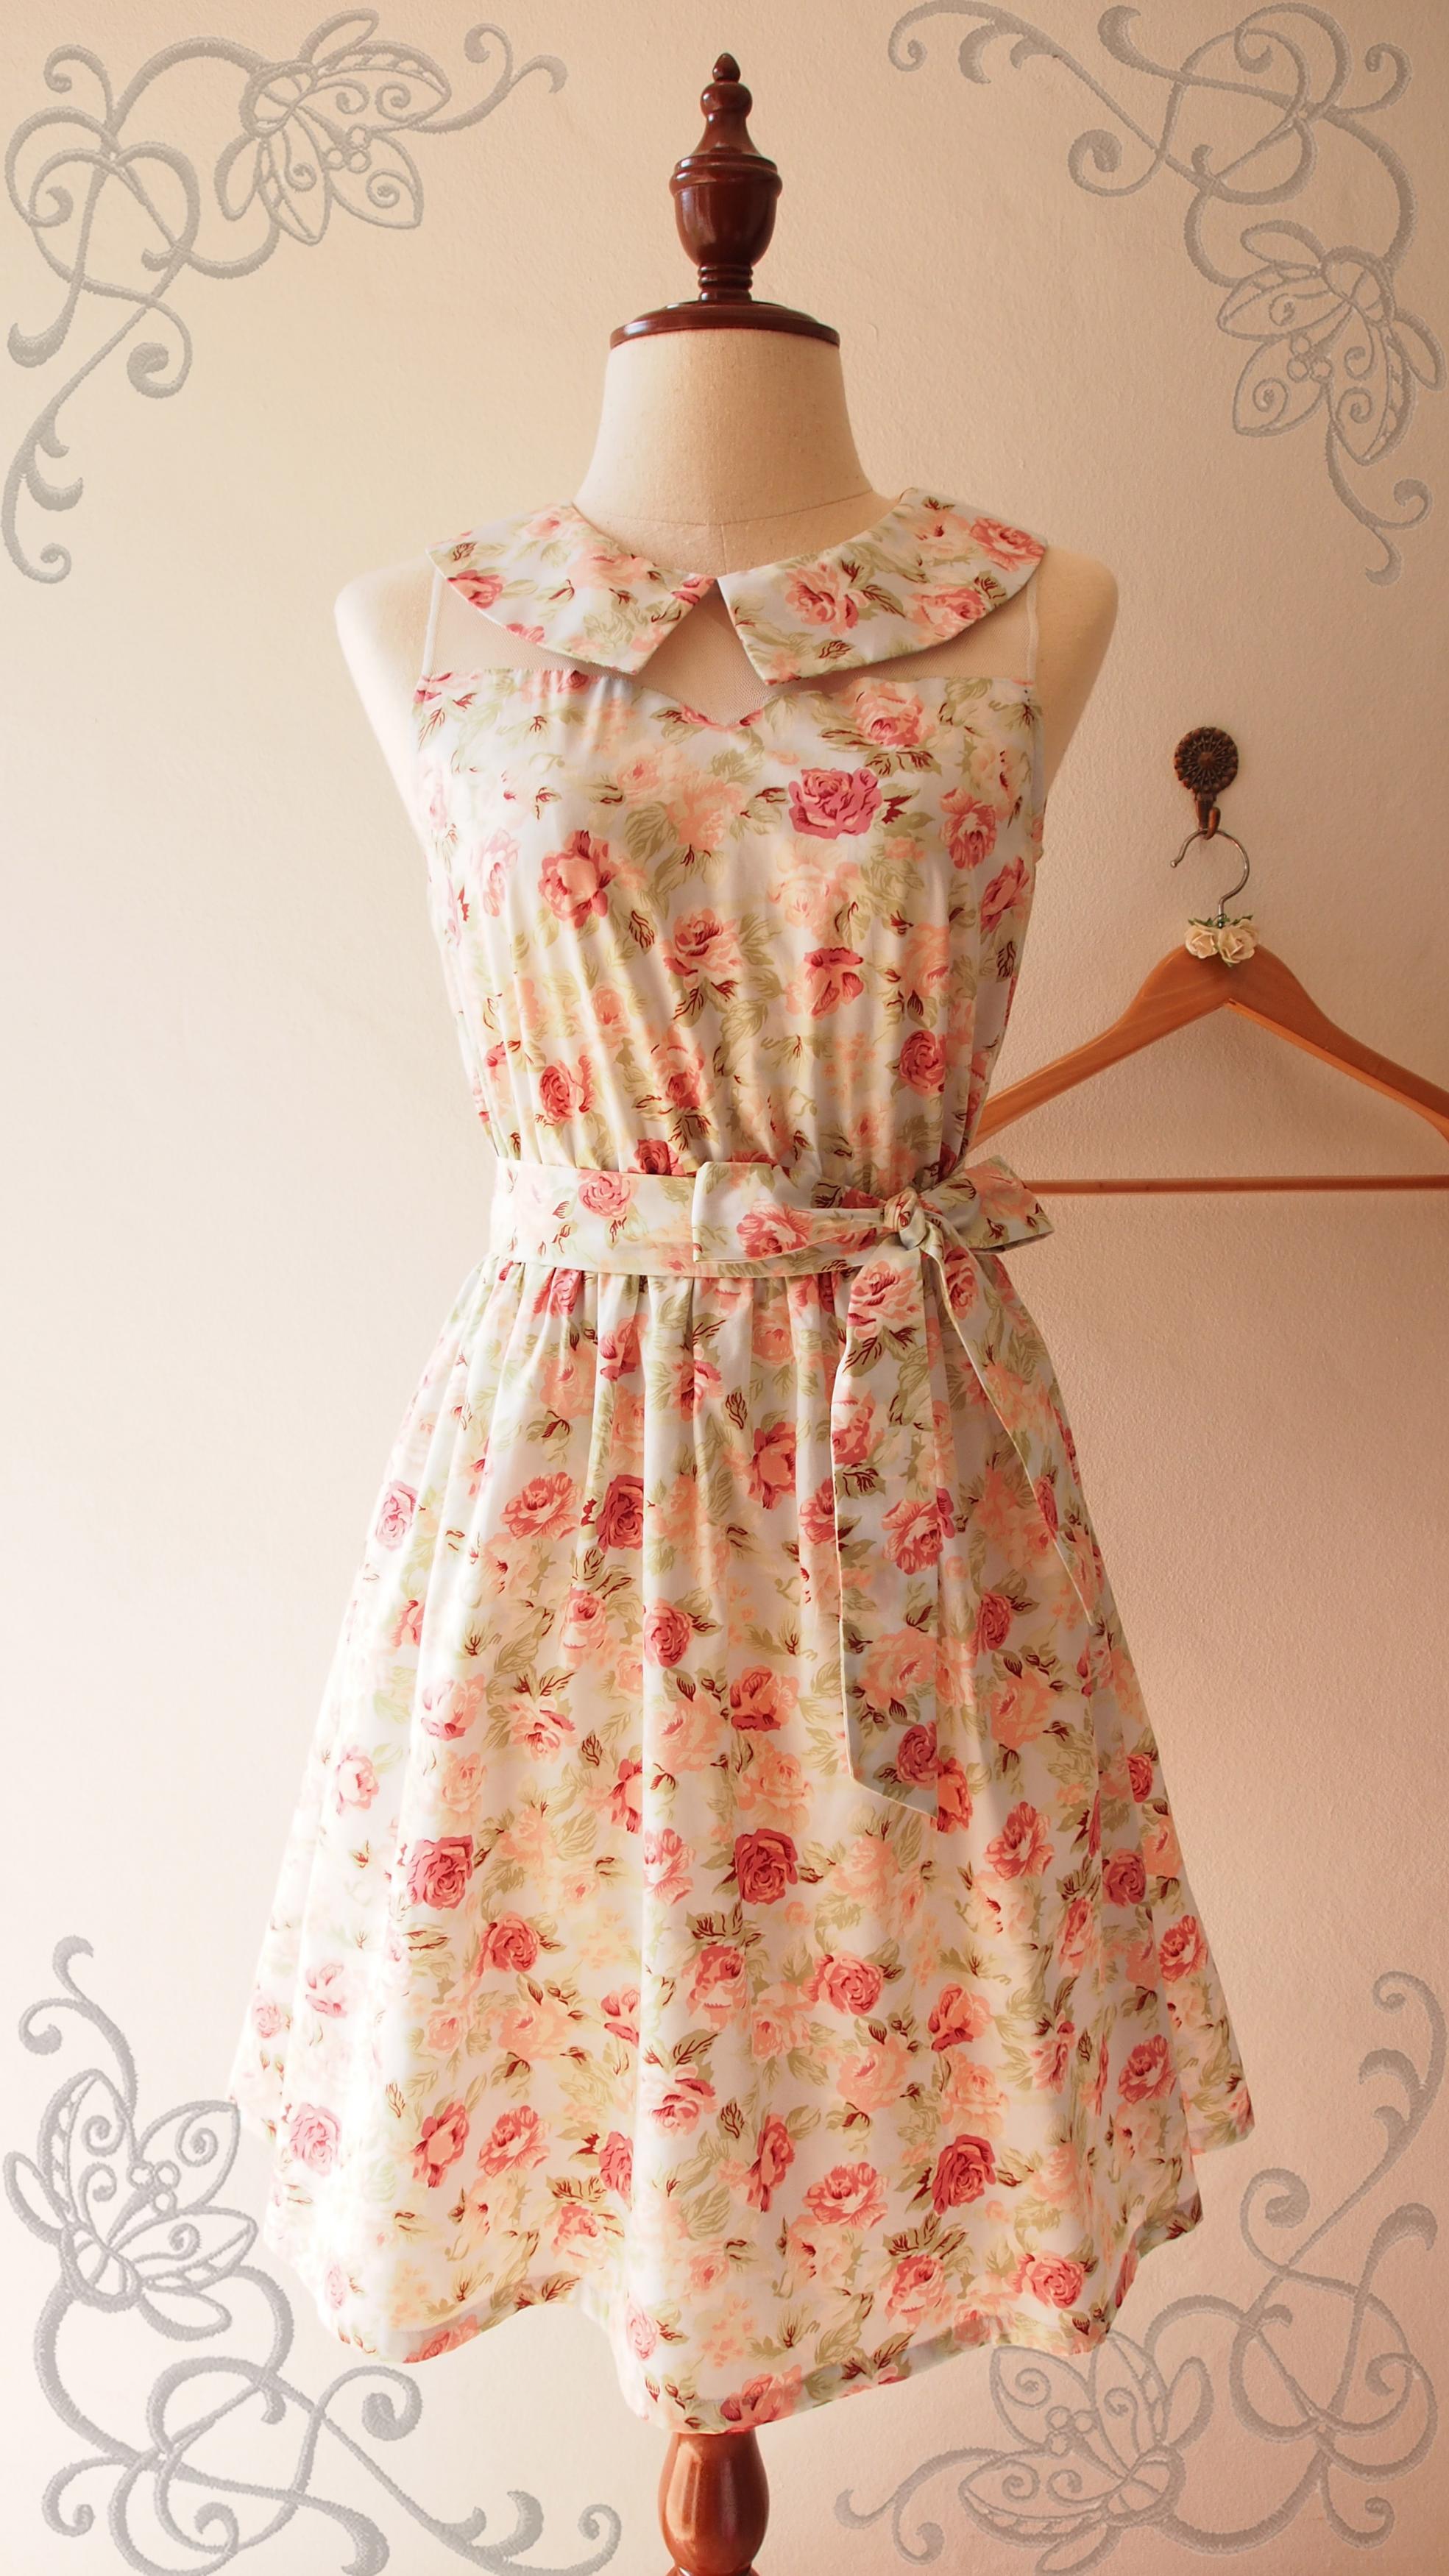 Collar Dress Blue With Coral Floral Vintage Inspired Rustic Wedding ...